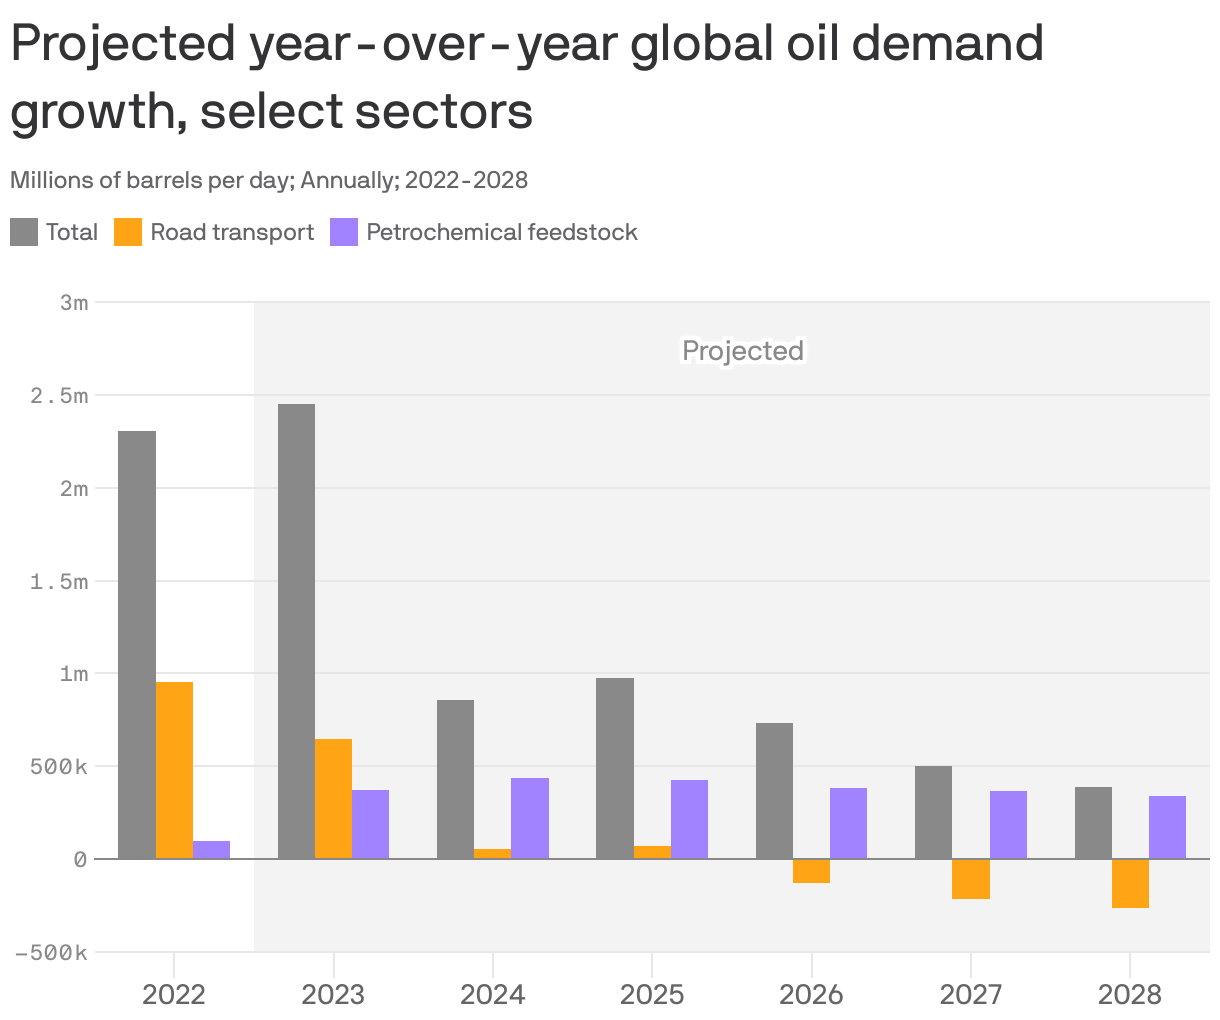 Projected year-over-year global oil demand growth, select sectors